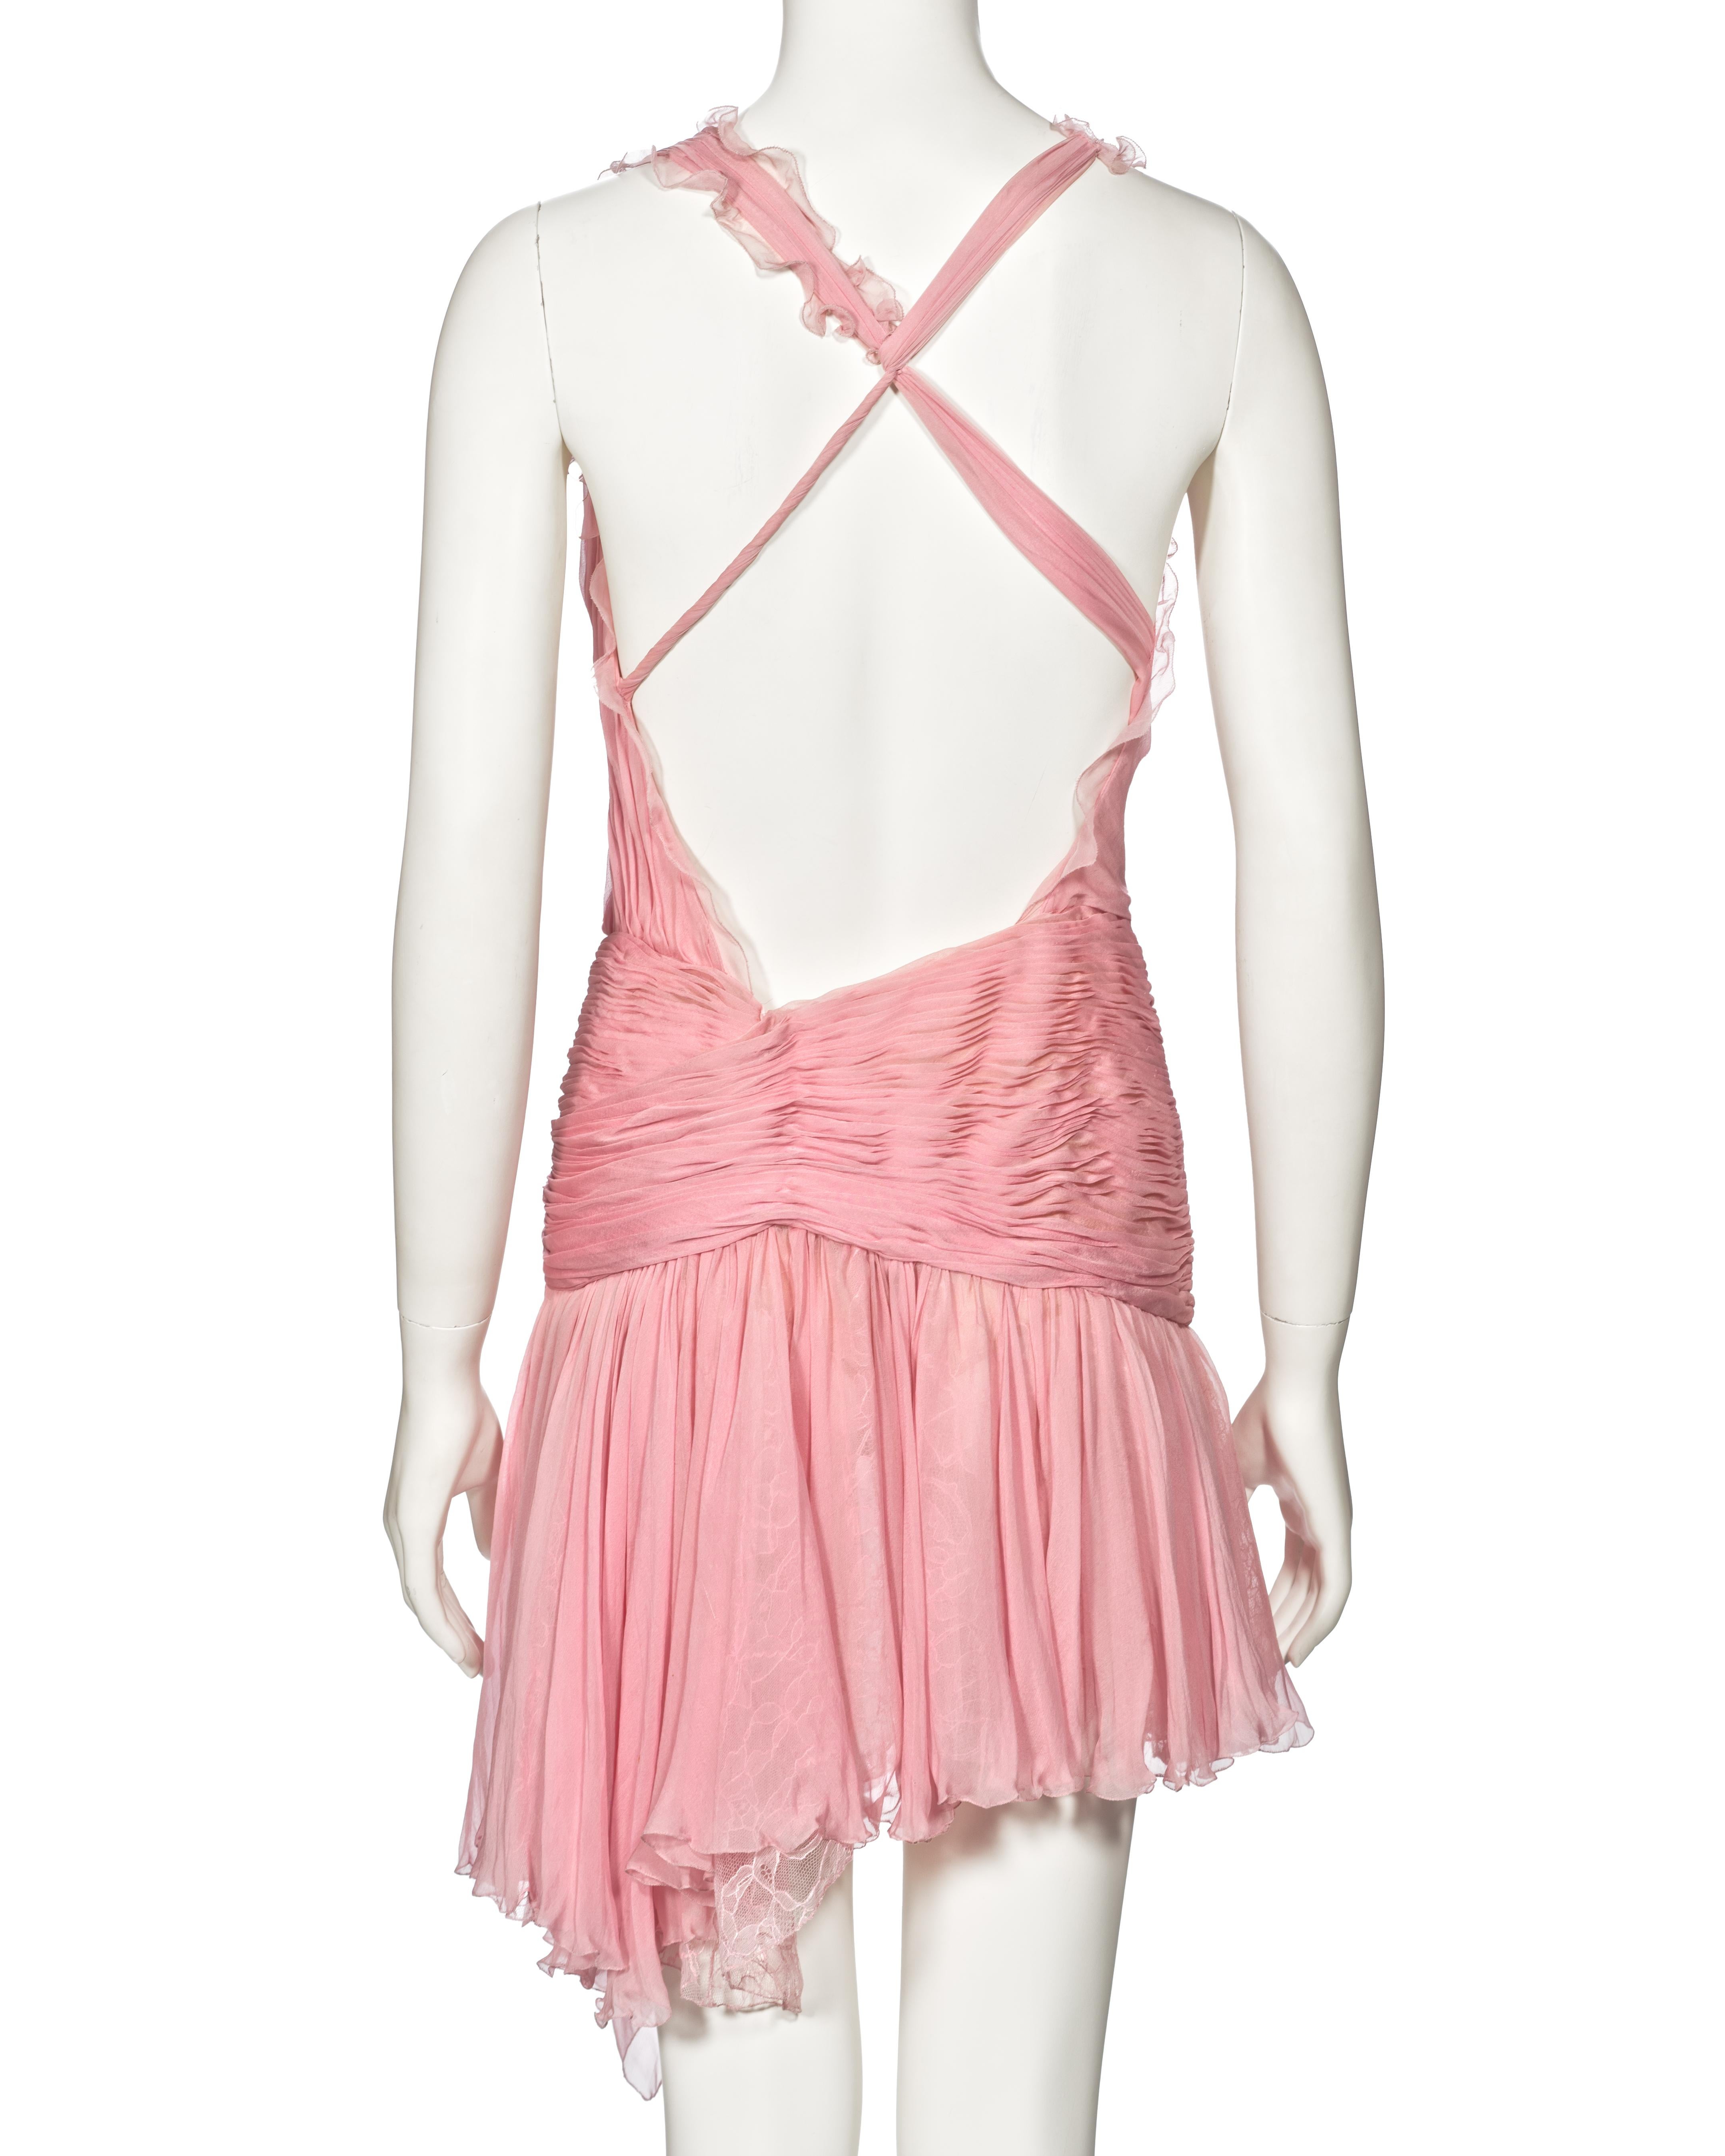 Atelier Versace Couture Pink Pleated Silk and Lace Mini Dress, ss 2004 For Sale 5